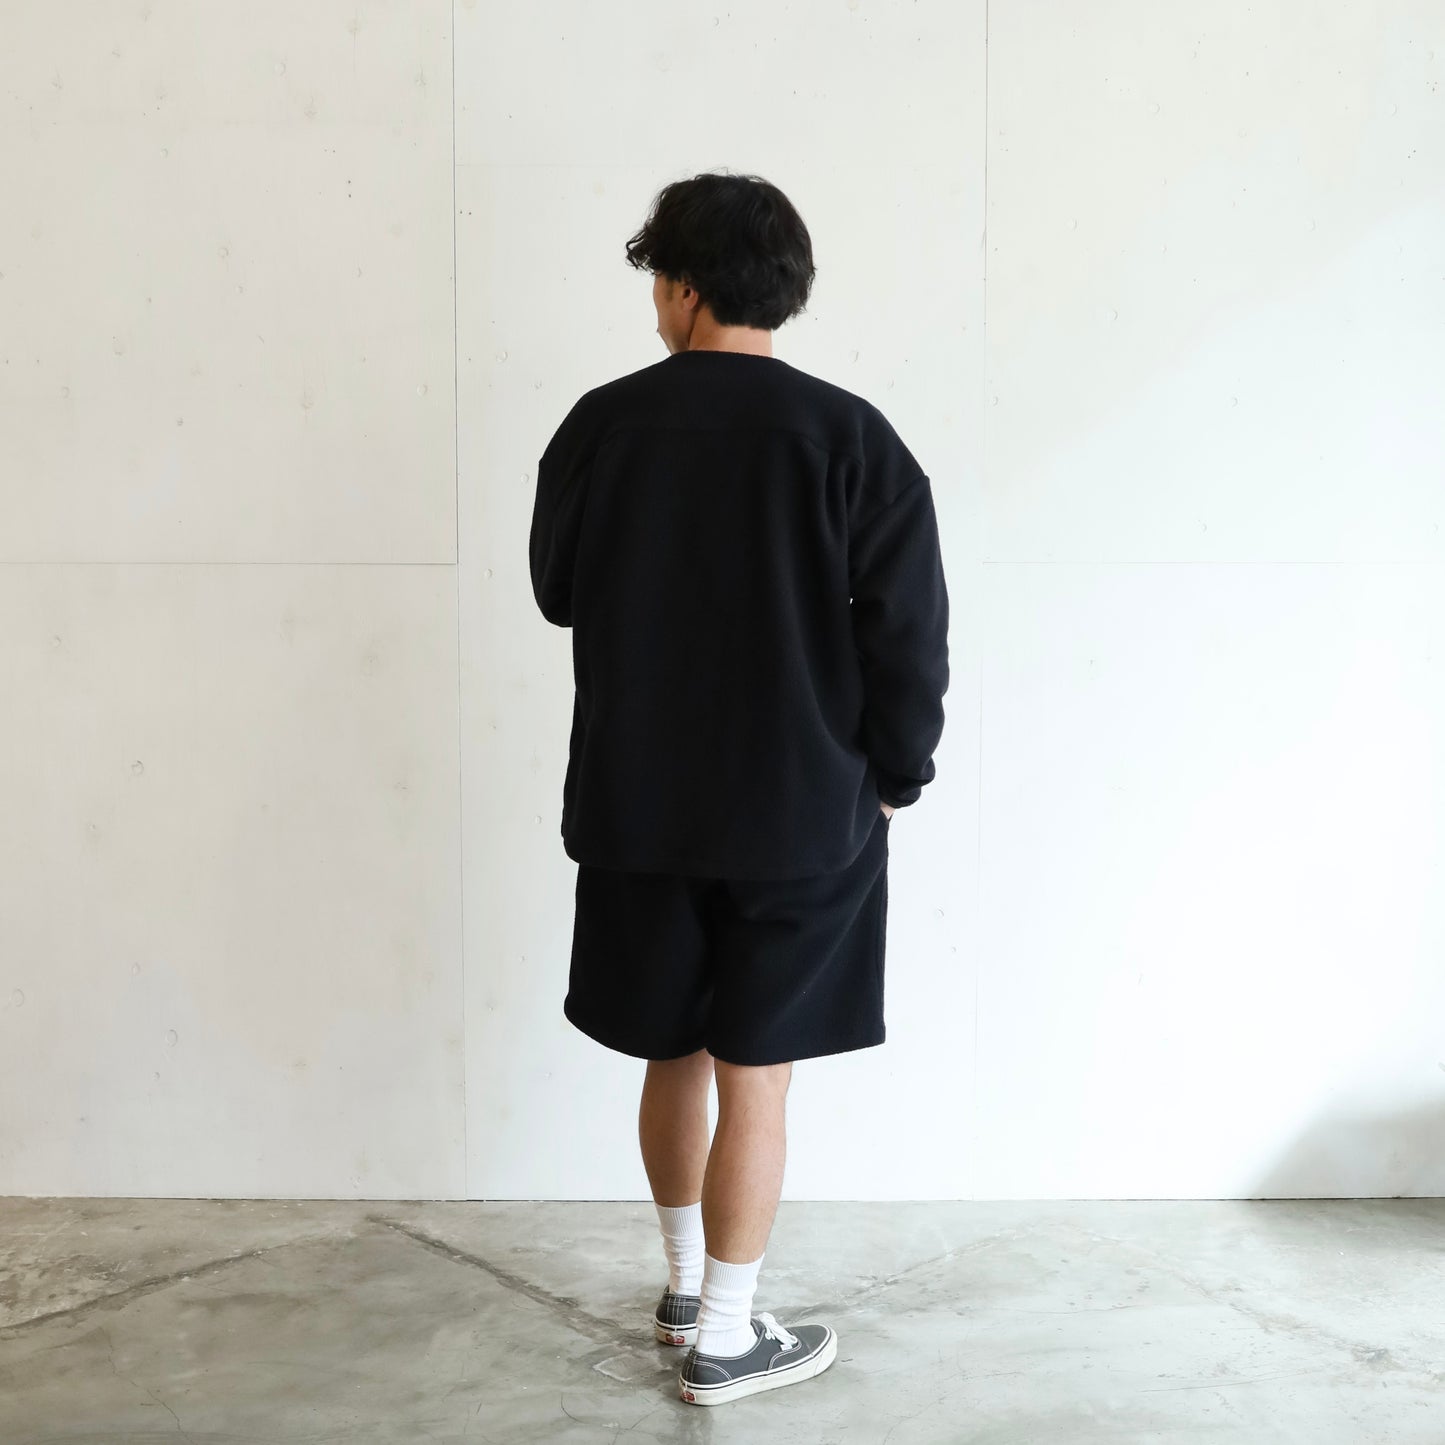 RELAX SHORTS Ⅱ (THERMAL PRO) - BLACK